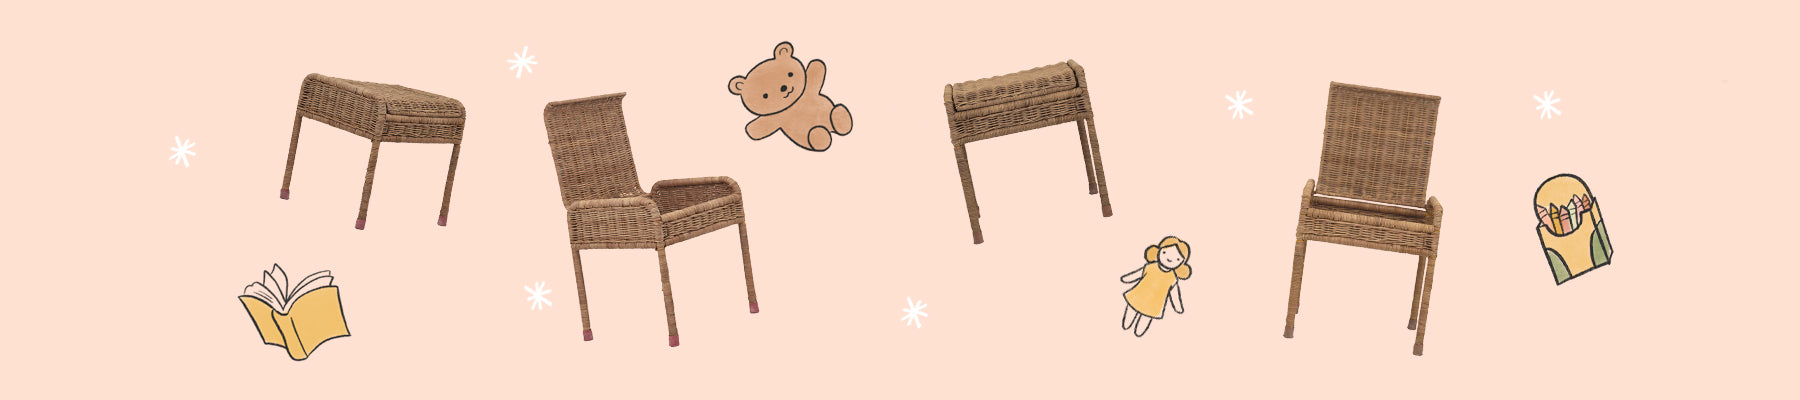 collections/Storie_Stool_Category_Banner.jpg - Oliliella